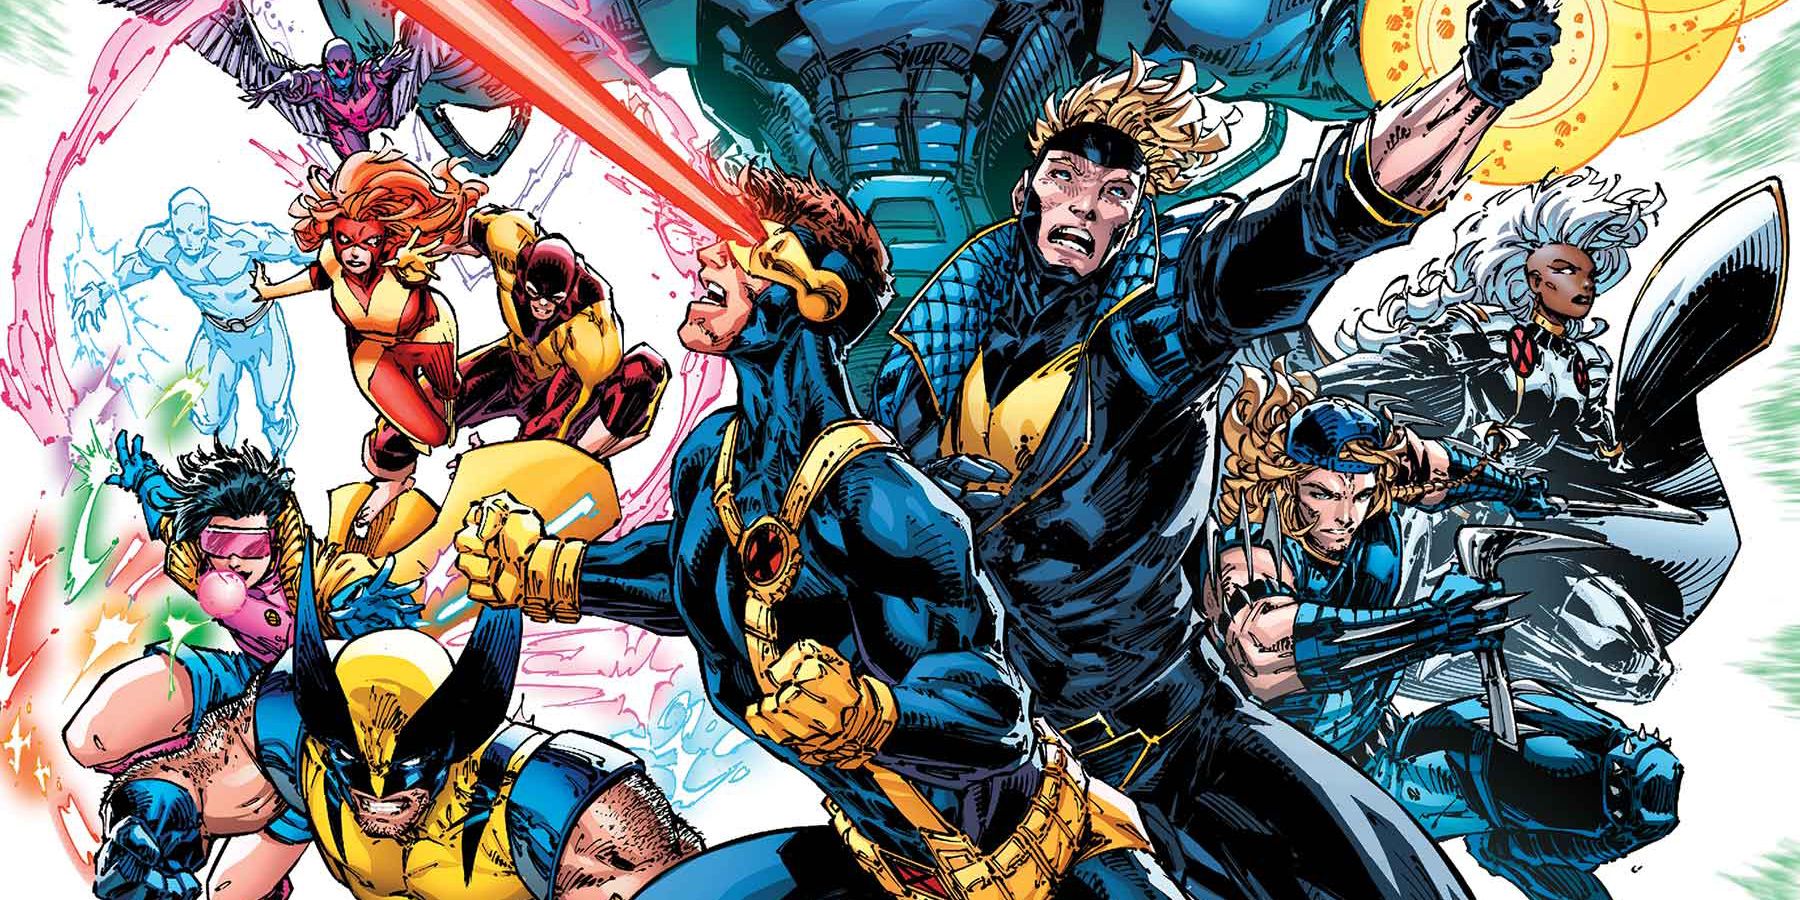 XMen Marvels Most EXTREME Mutant Is Finally About to Have His Moment